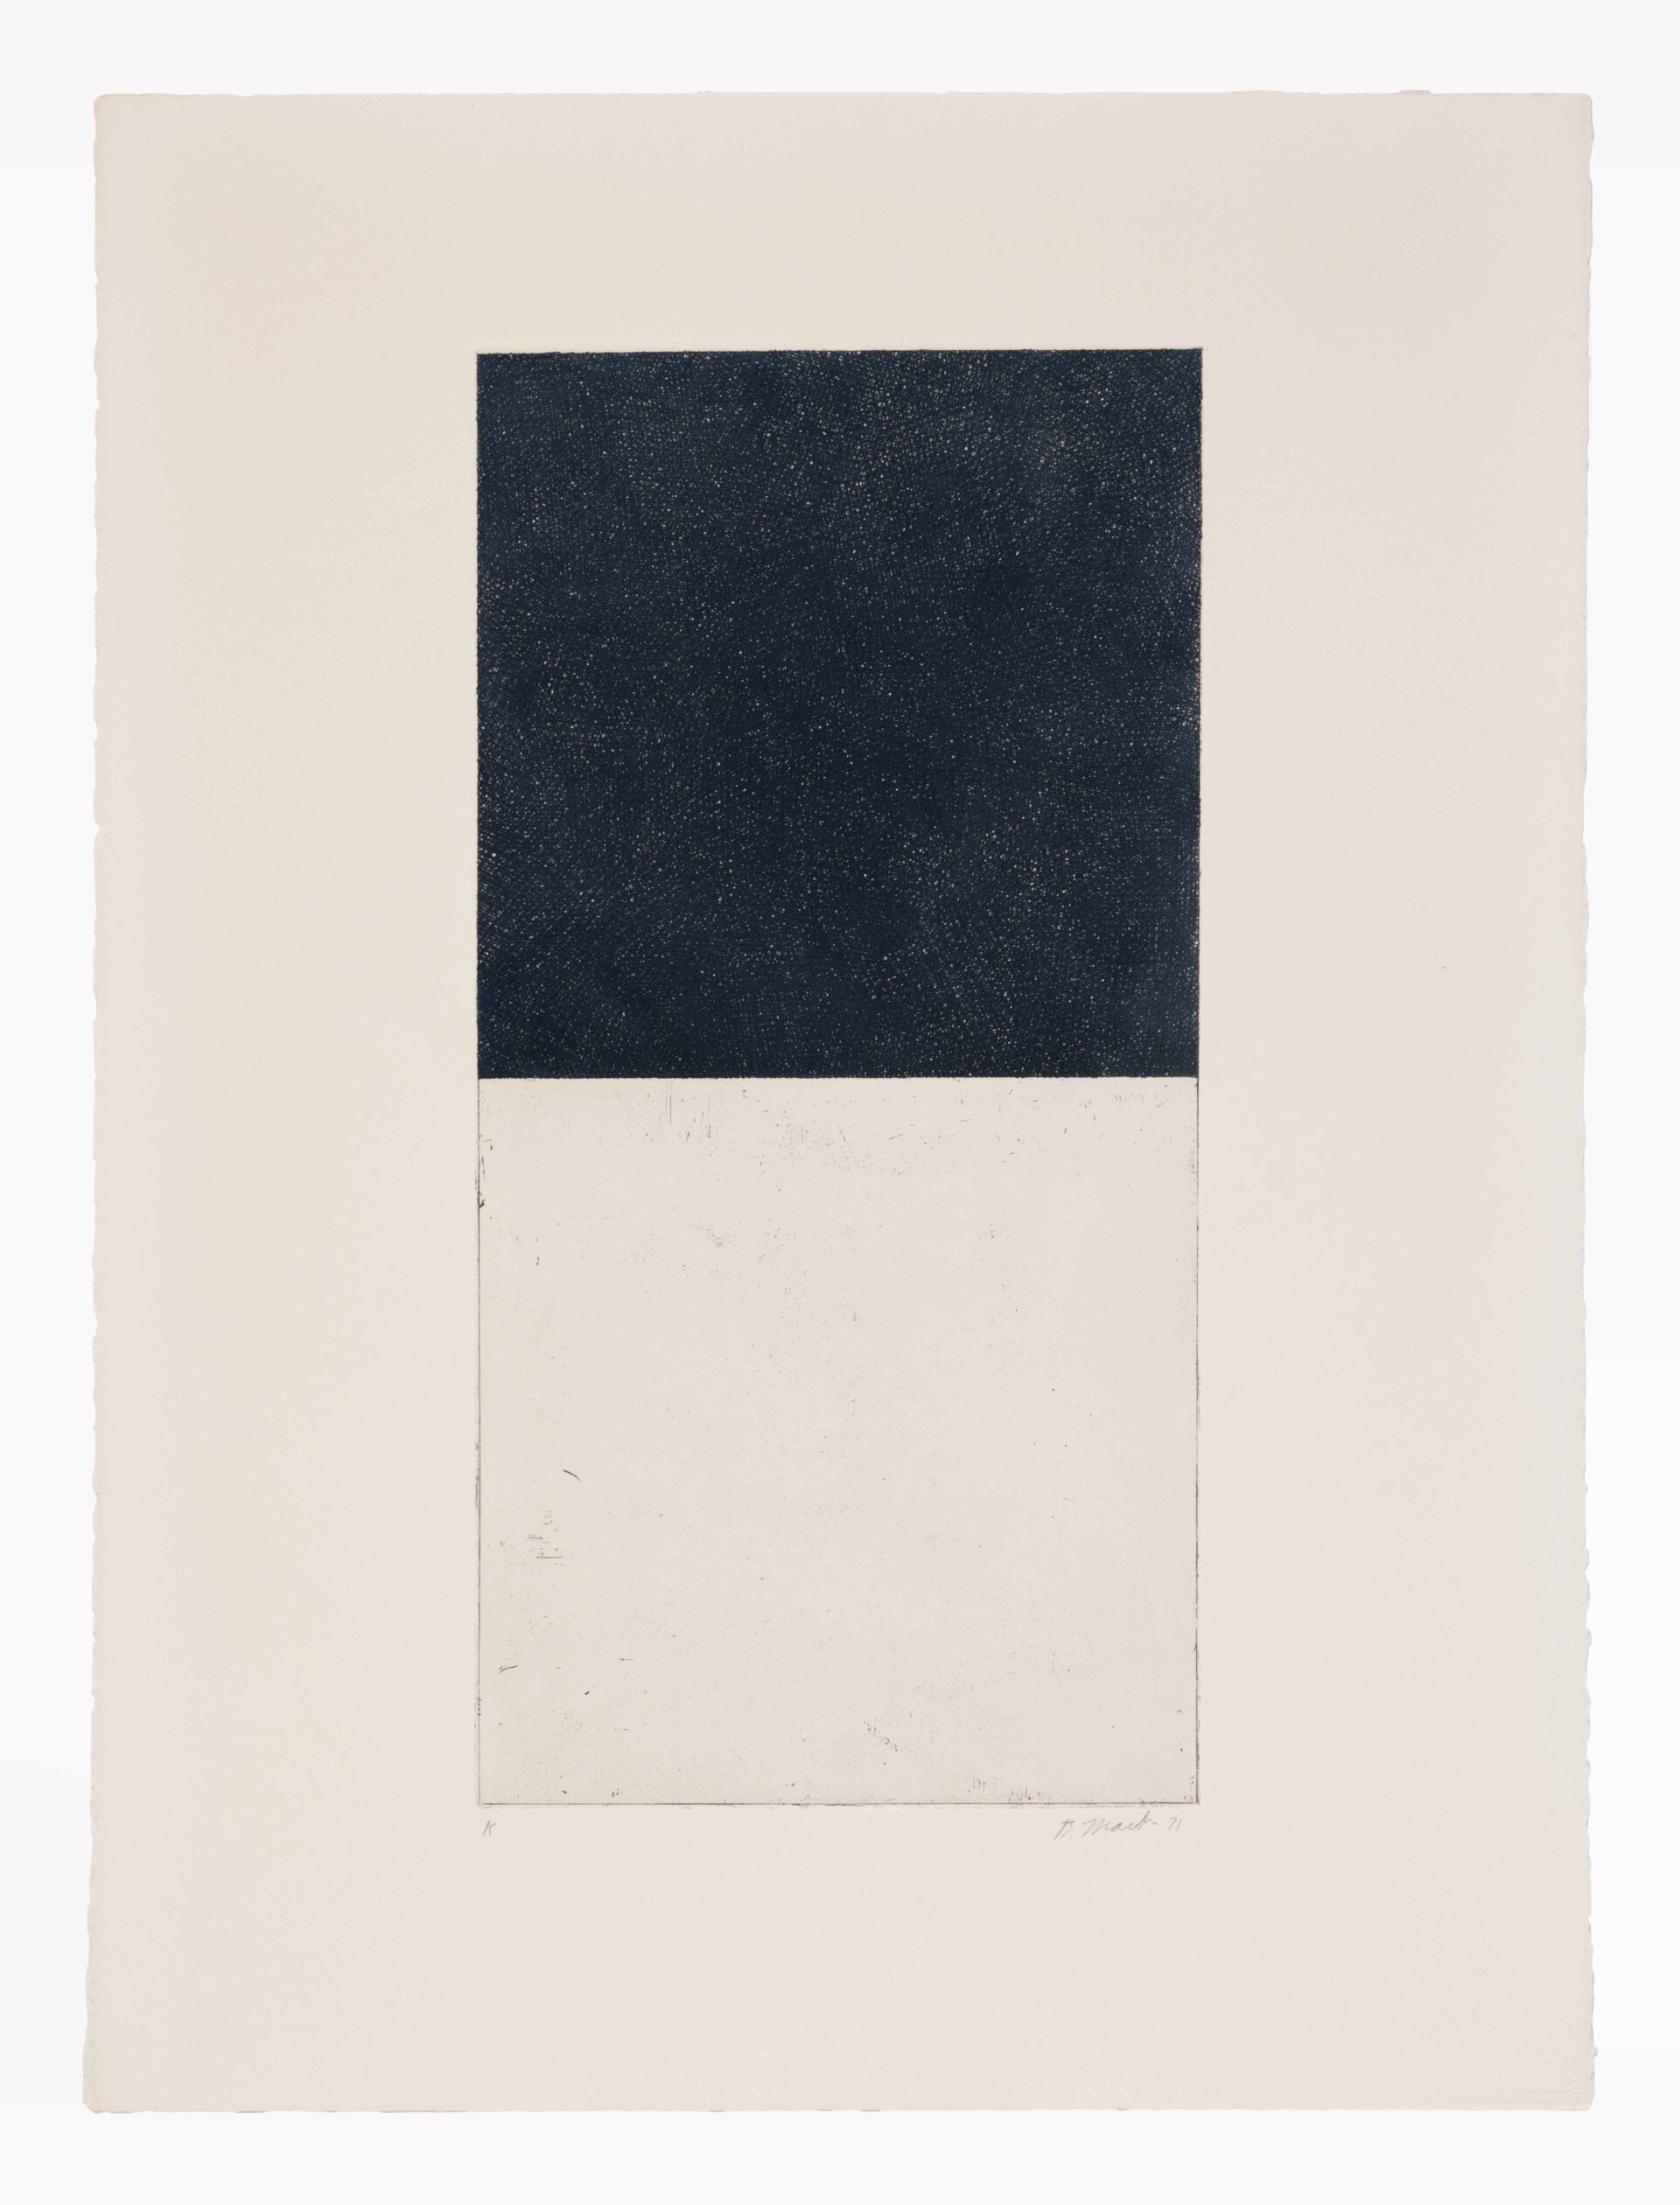 Brice Marden Ten Days, 1971 Etching and aquatint on paper, from a portfolio of 8 etchings 29 7/8 x 22 1/2 inches (75.9 x 57.2 cm) AP11 (K), Edition of 30, plus 20AP (A-T); AP; TP